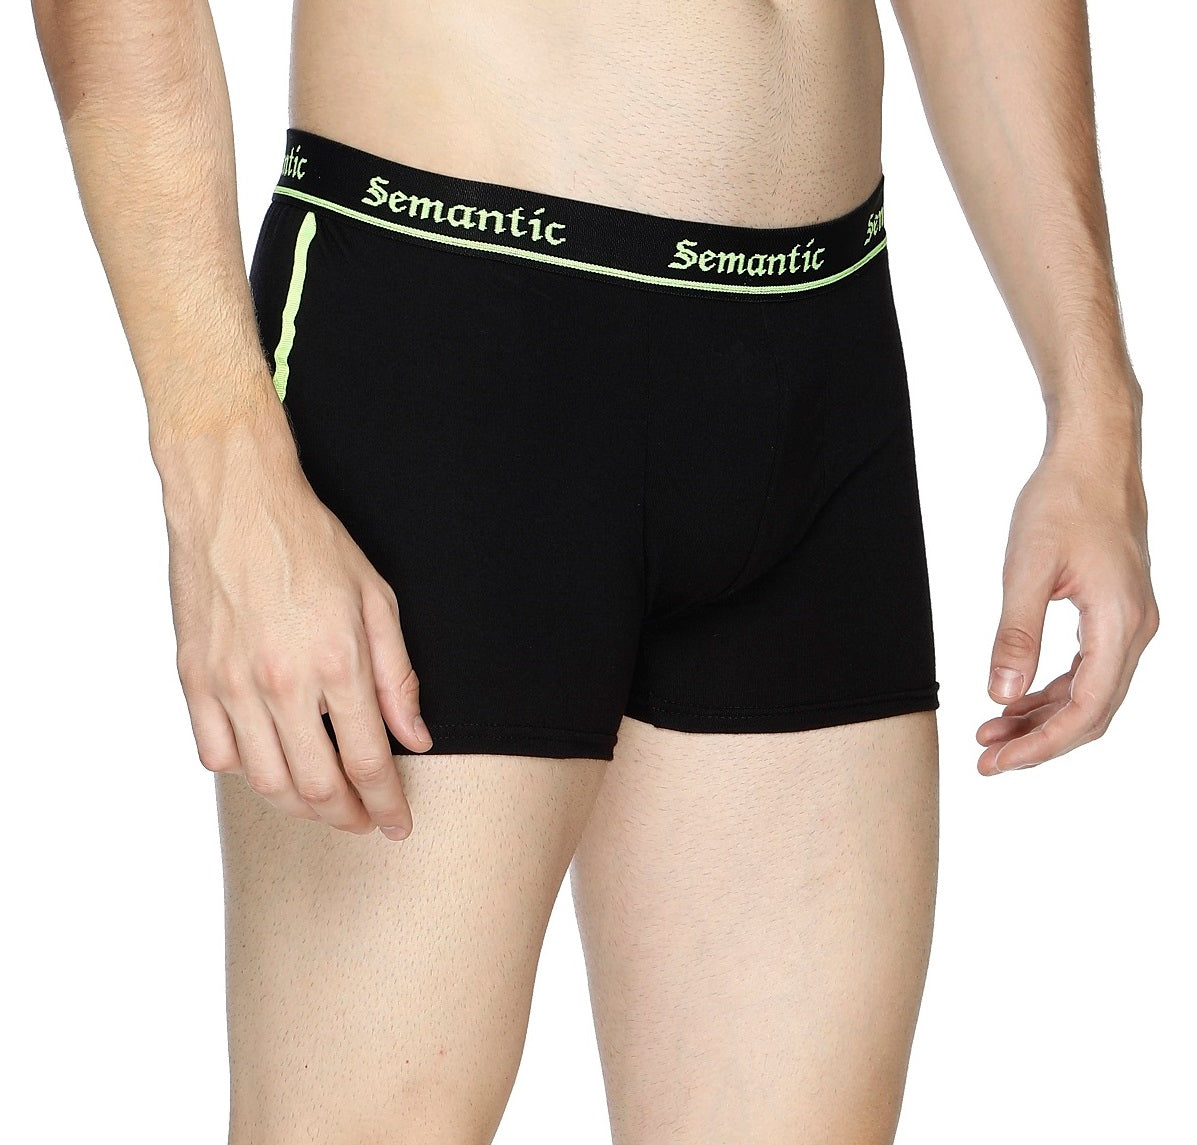 Semantic Cotton Trunks - With Stylish Tape